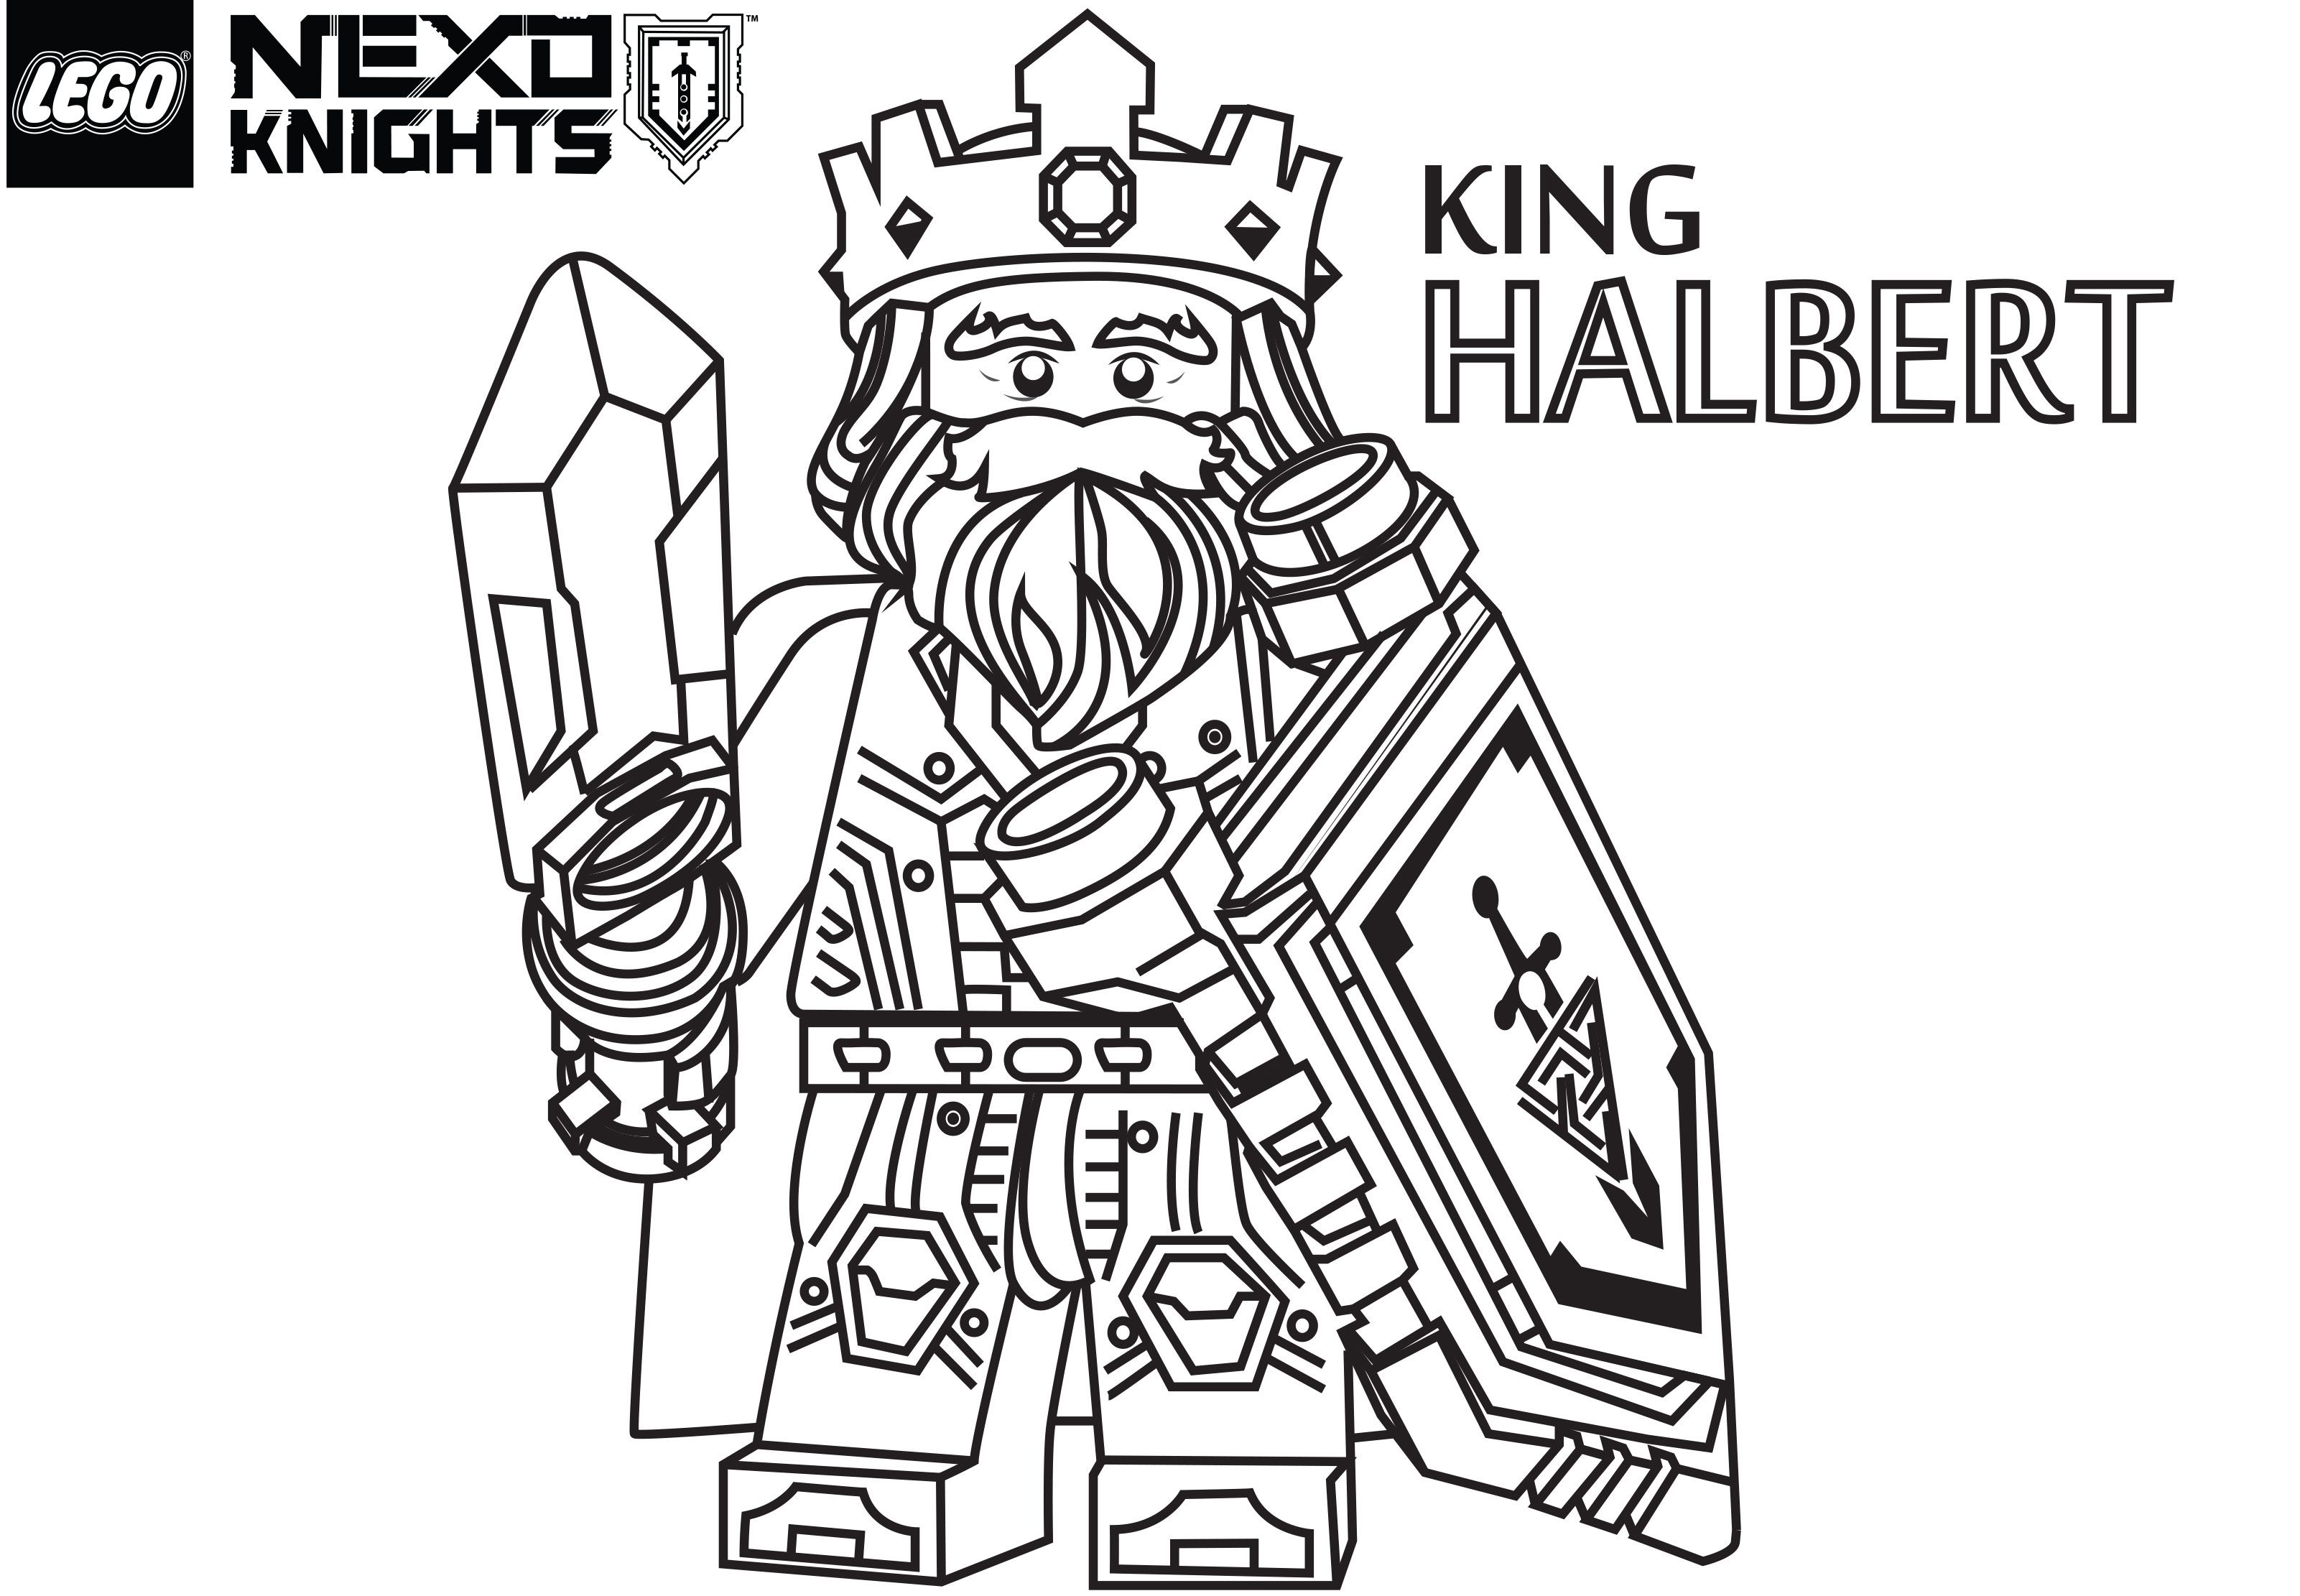 Nexo Lego Knights Coloring Pages Sketch Coloring Page ...